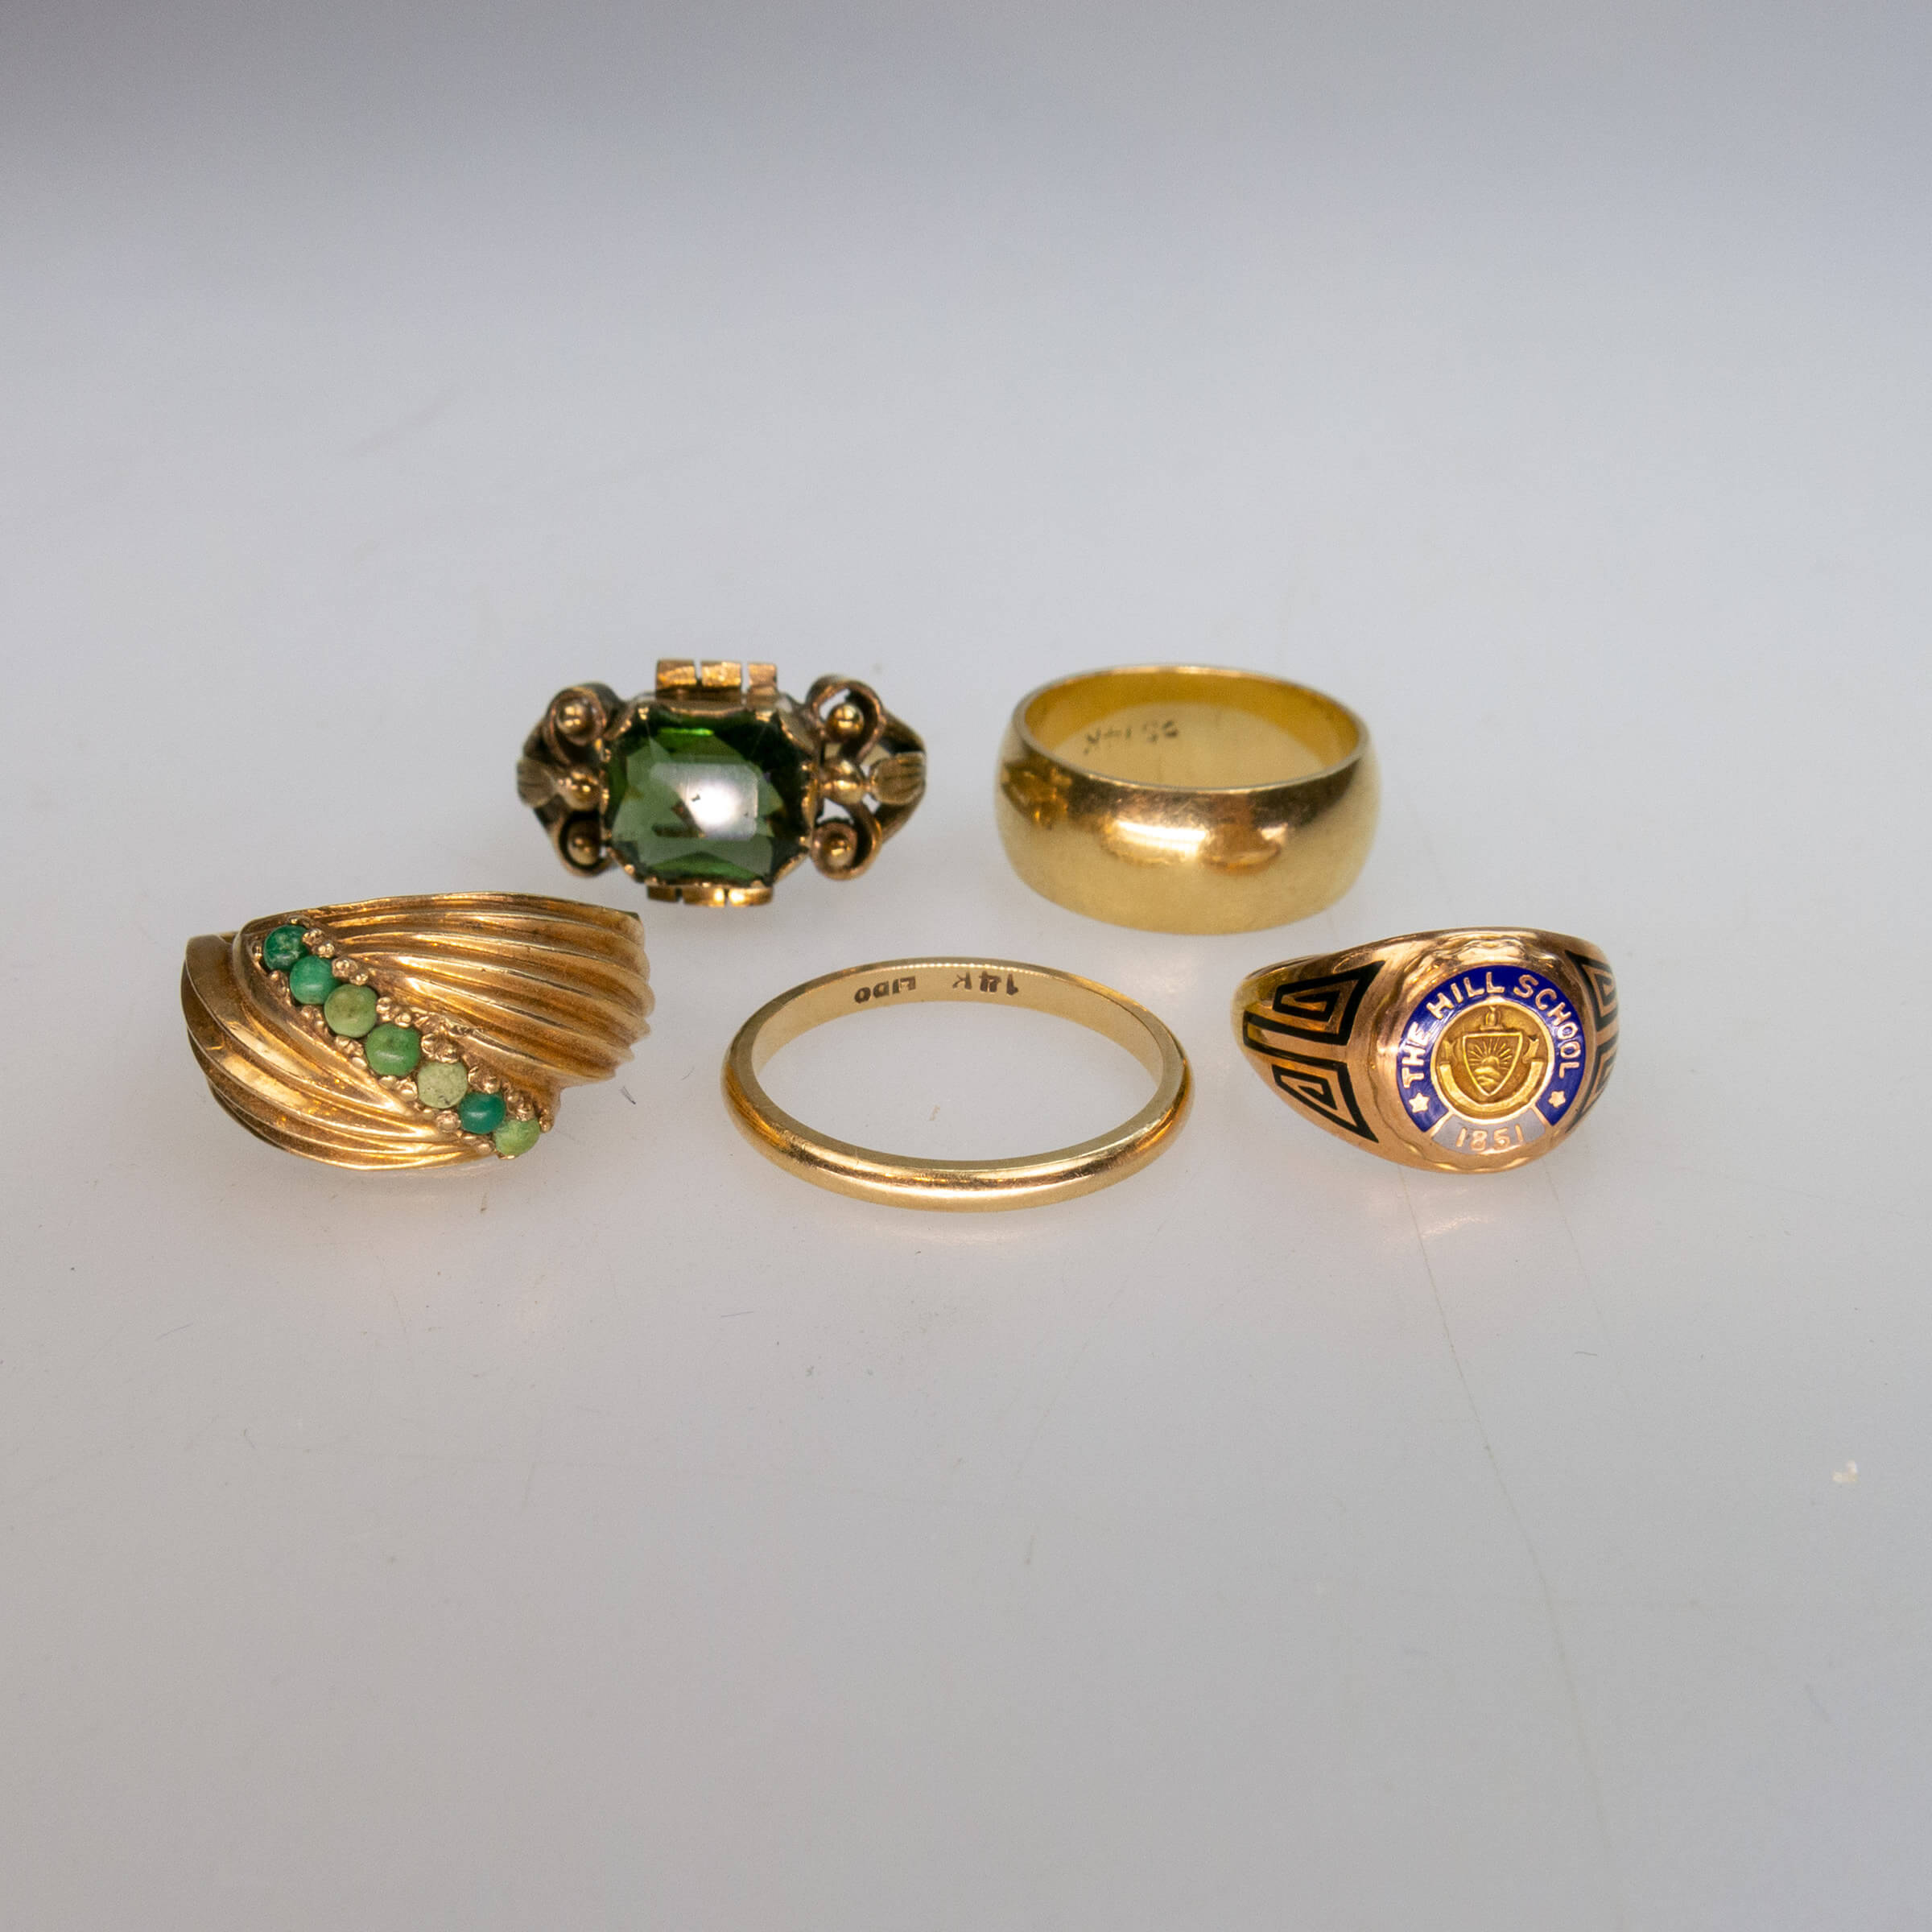 1 x 8k, 2 x 10k & 2 x 14k Yellow Gold Rings And Bands